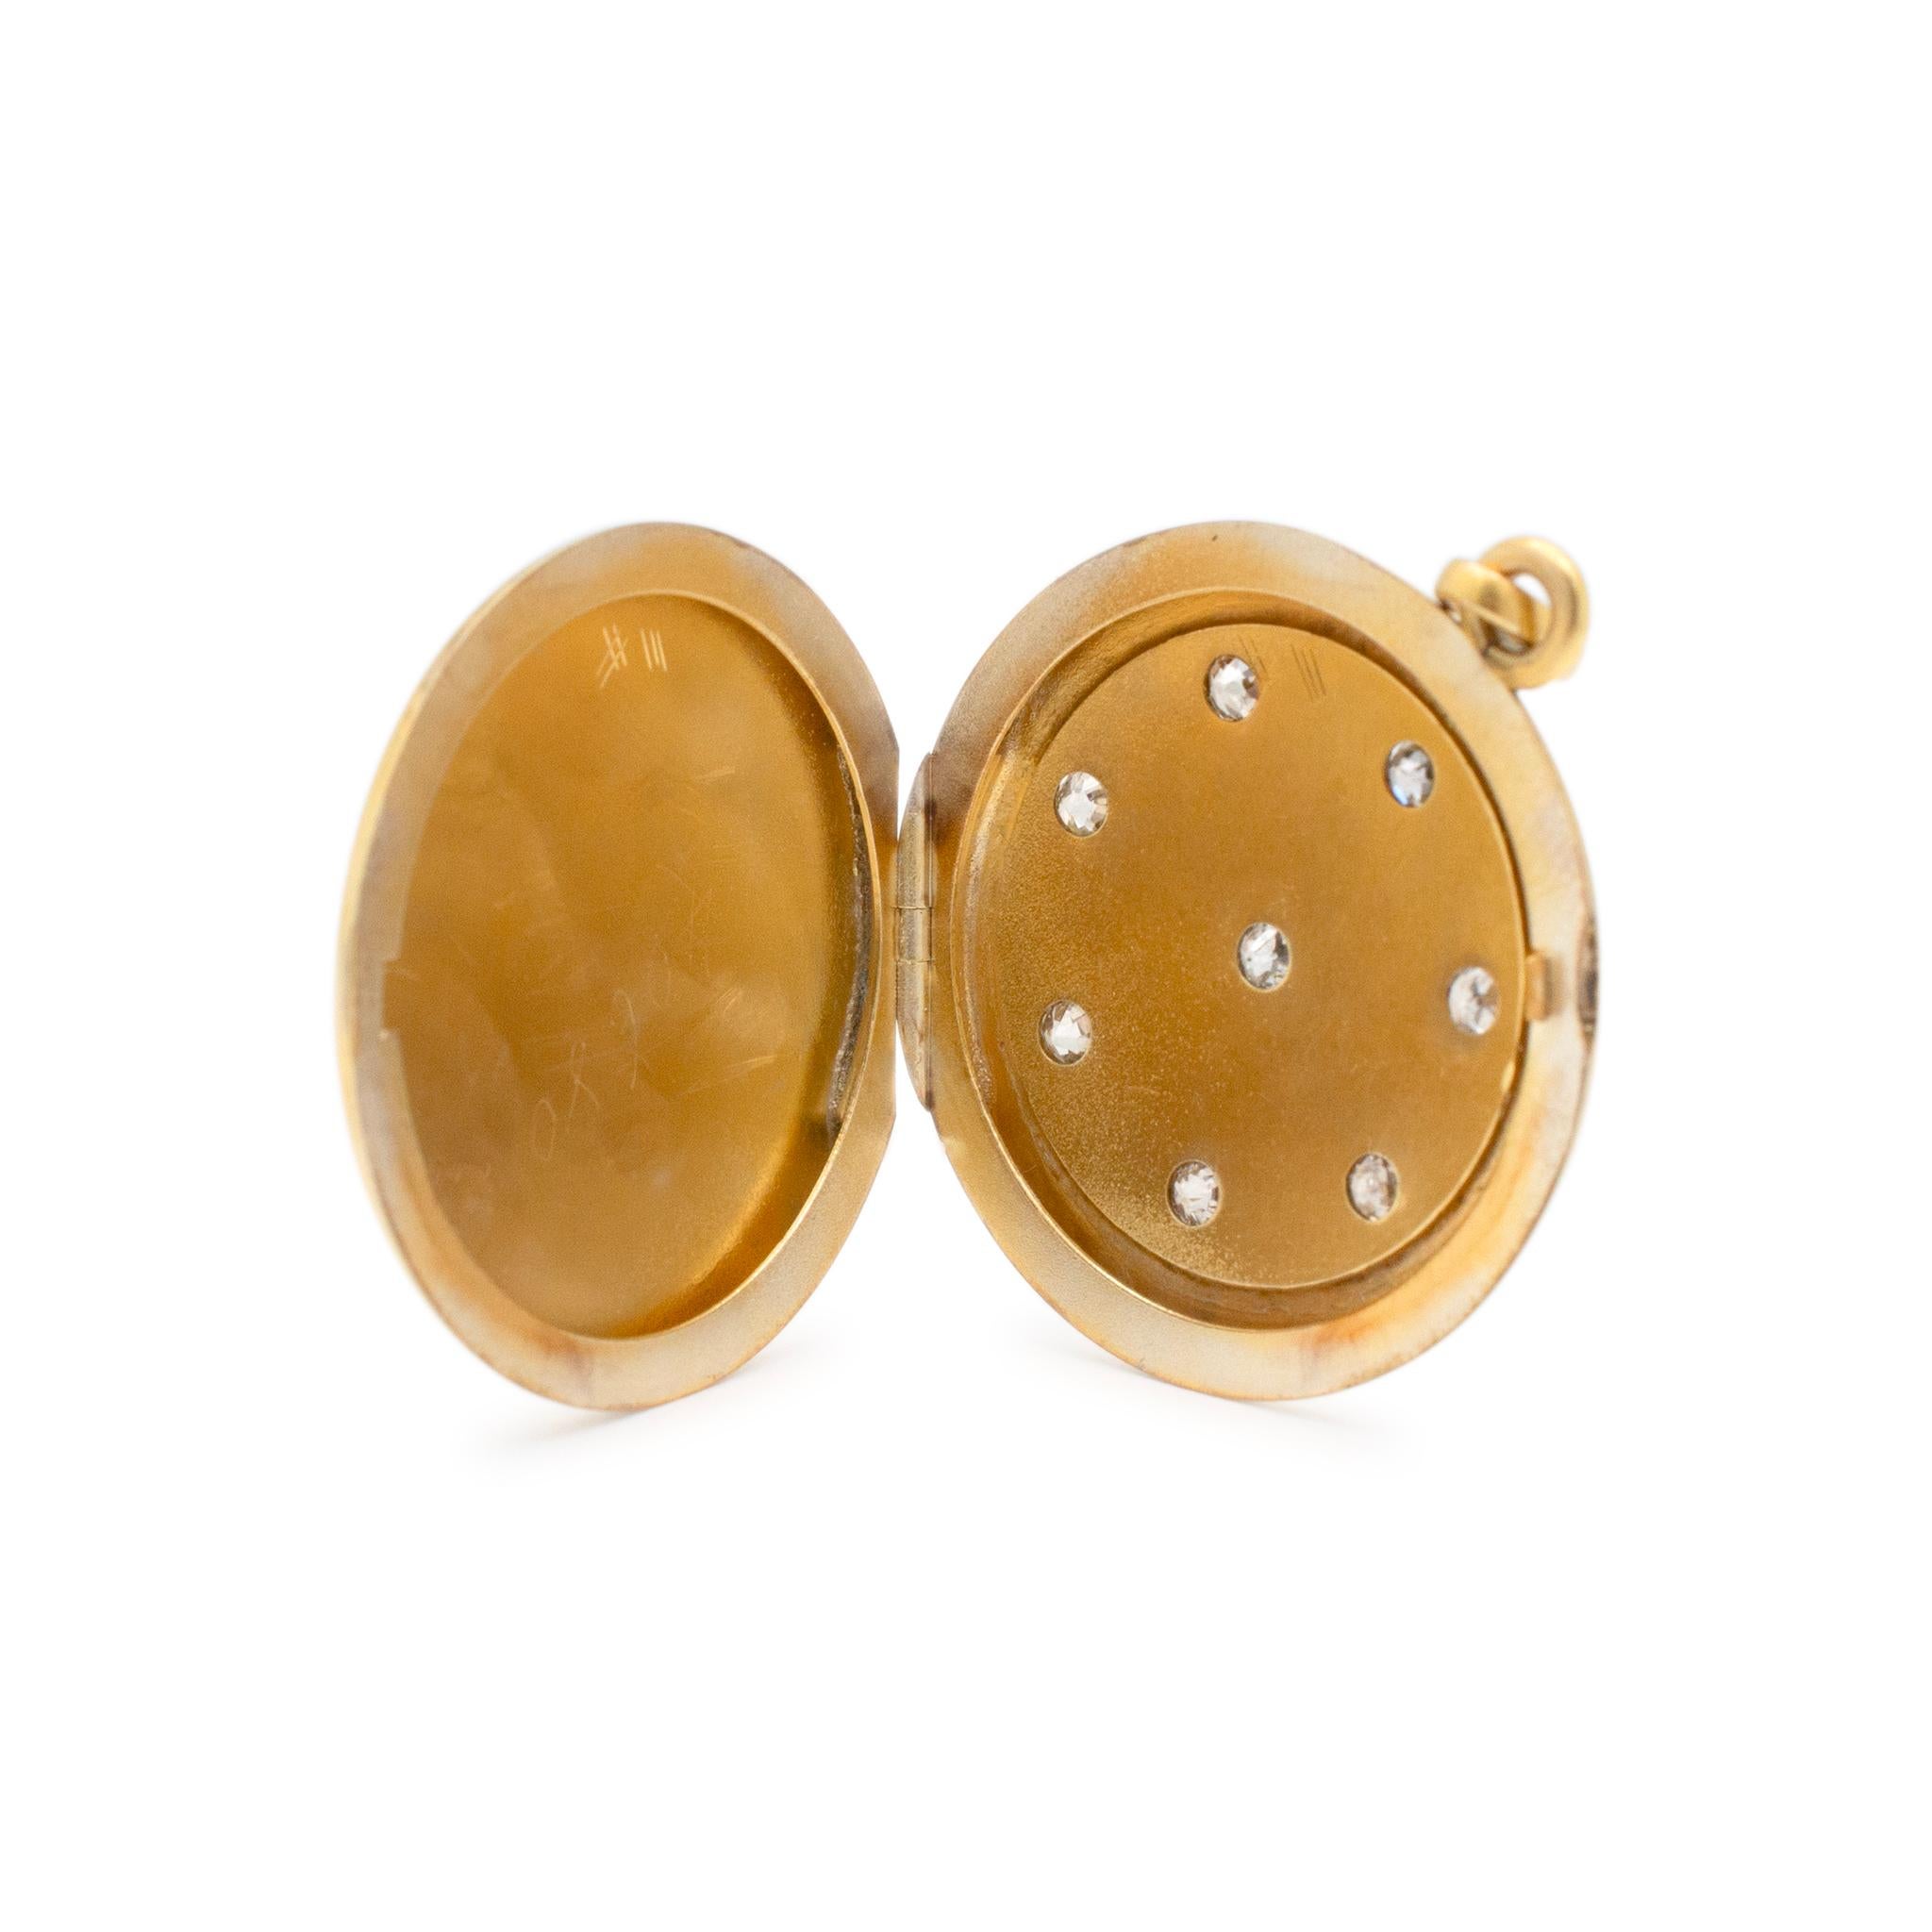 Metal Type: 14K Yellow Gold

Gender: Ladies

Thickness: 6.00 mm

Diameter: 1.25 inches

Weight: 12.29 grams

Ladies 14K yellow gold diamond victorian (1837-1901) circle locket pendant. The metal was tested and determined to be 14K yellow gold. In